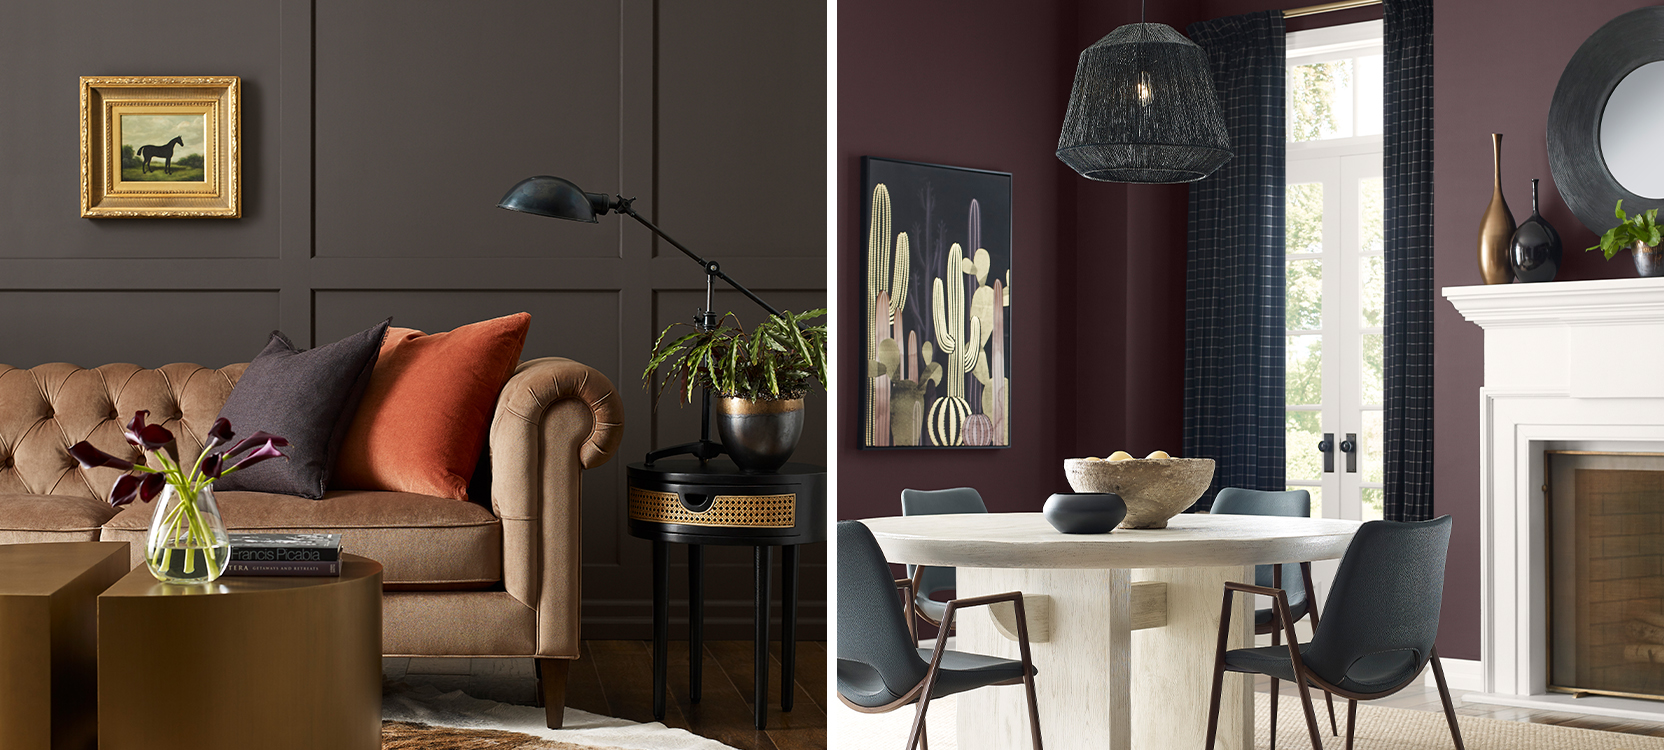 First image: Sitting room with tufted taupe velvet round-armed sofa, black side table and antique-style desk lamp, split-cylinder metallic coffee table, faux animal-hide rug and grid pattern board-and-batten wall painted deep brown. Second image: Dining area with dark purple walls with white French doors framed by navy curtains, black dining chairs and white table under black pendant light, faux zebra-hide rug in front of white fireplace.